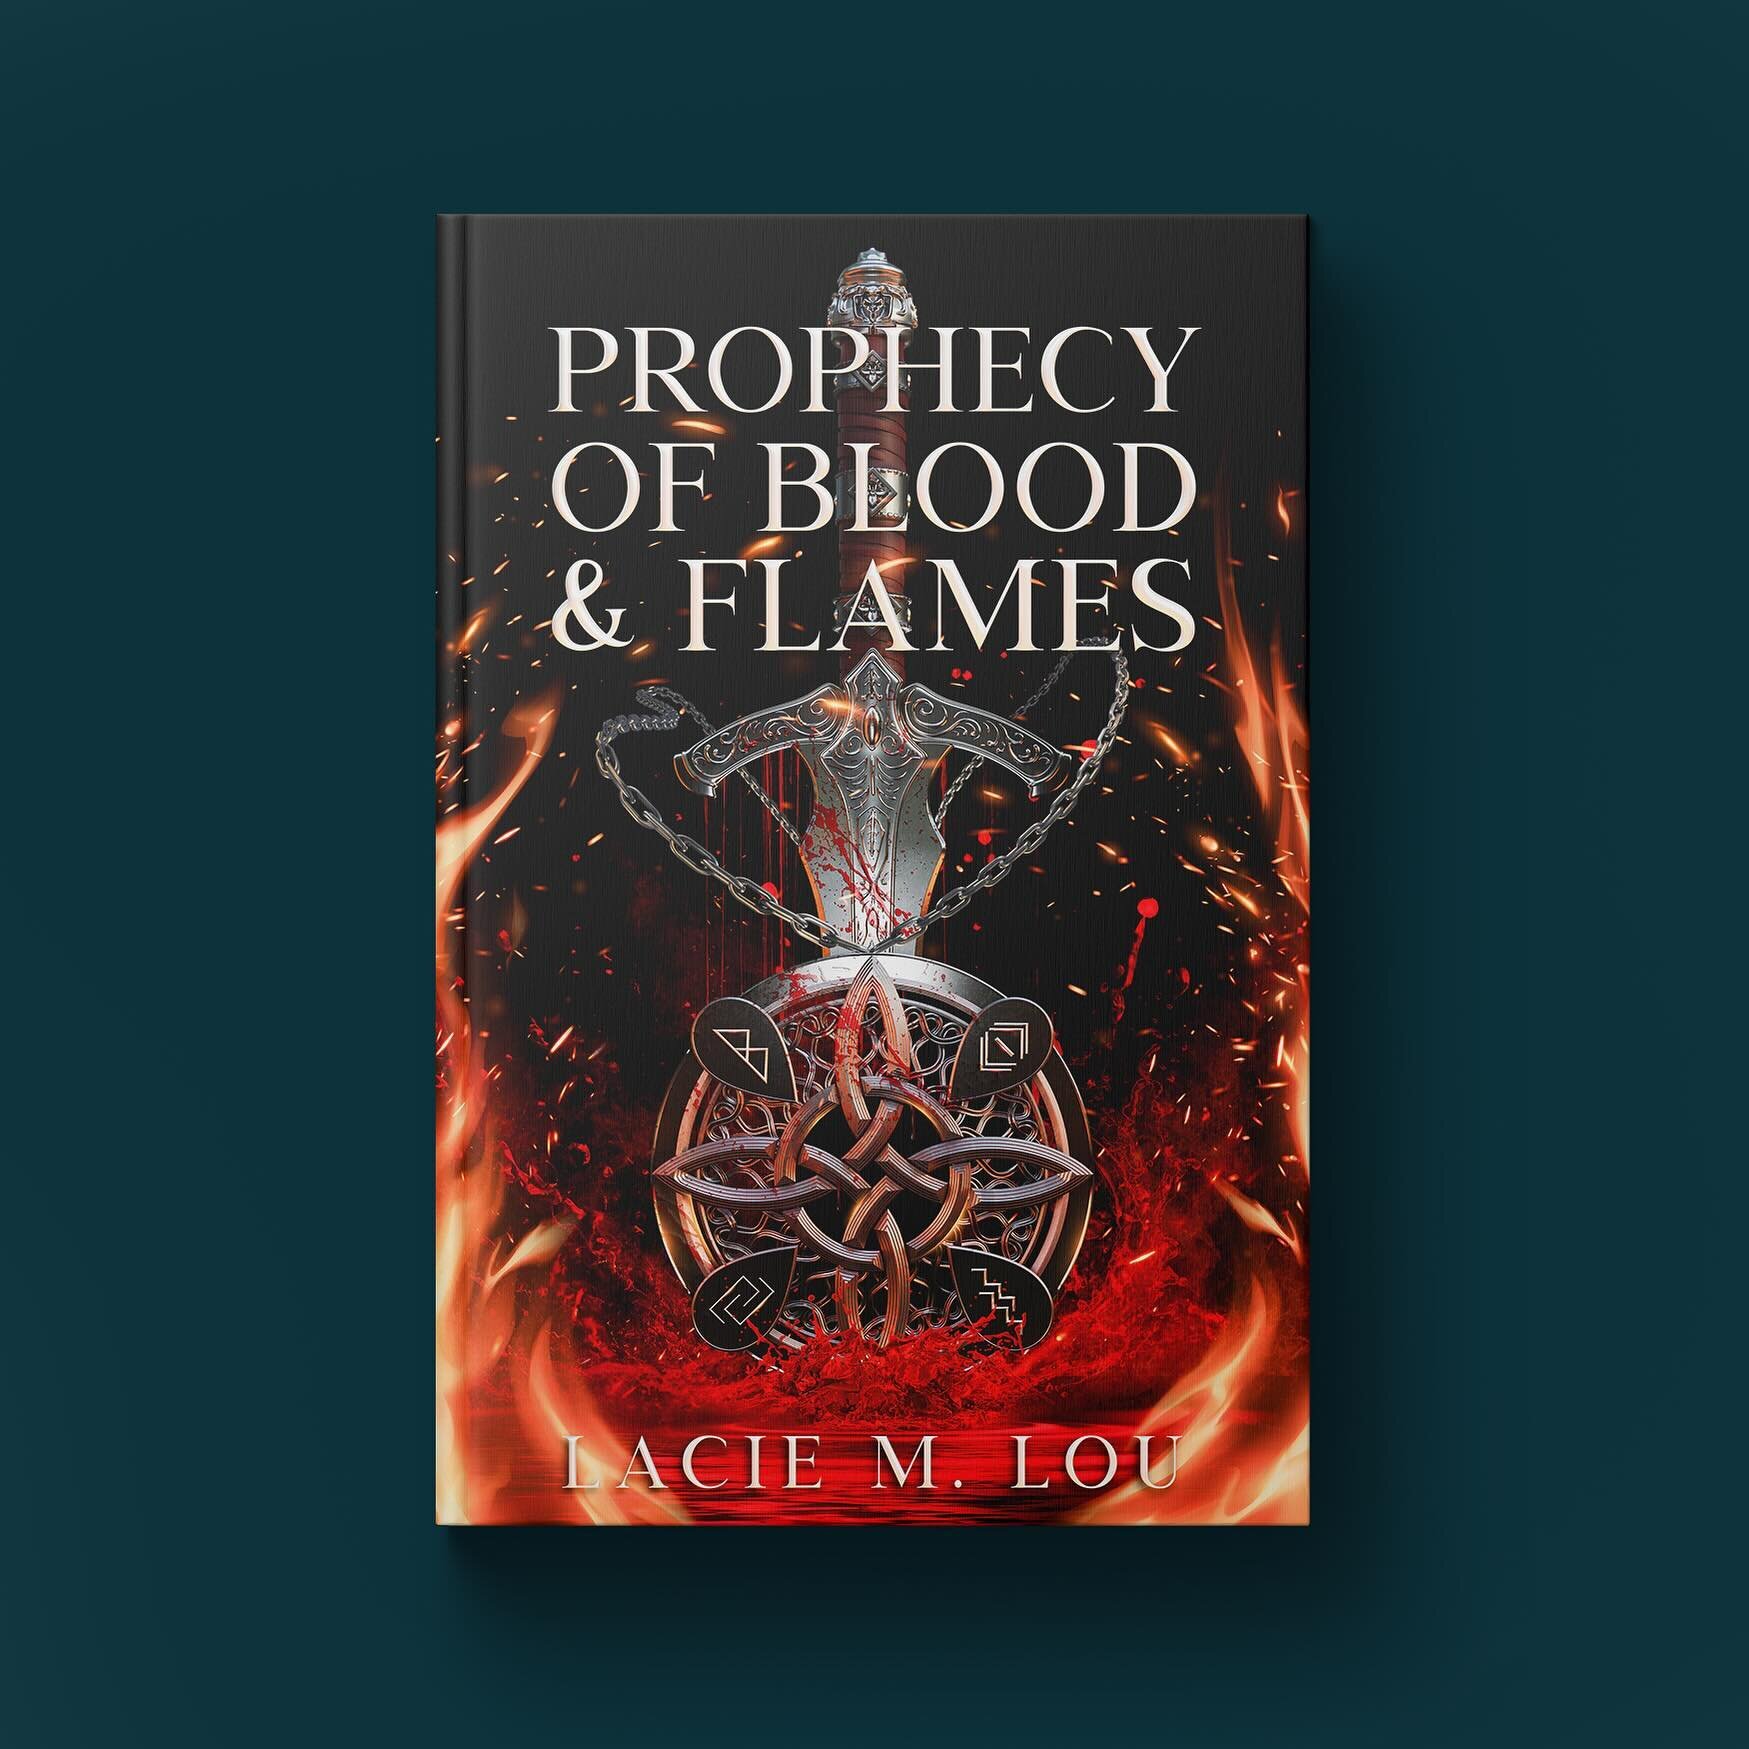 🚨COVER REVEAL🔥 I am beyond excited to reveal the cover for PROPHECY OF BLOOD &amp; FLAMES! Being chosen as the cover artist for this project has been a deeply gratifying experience. This cover is a special blend of 3D artistry and photo manipulatio